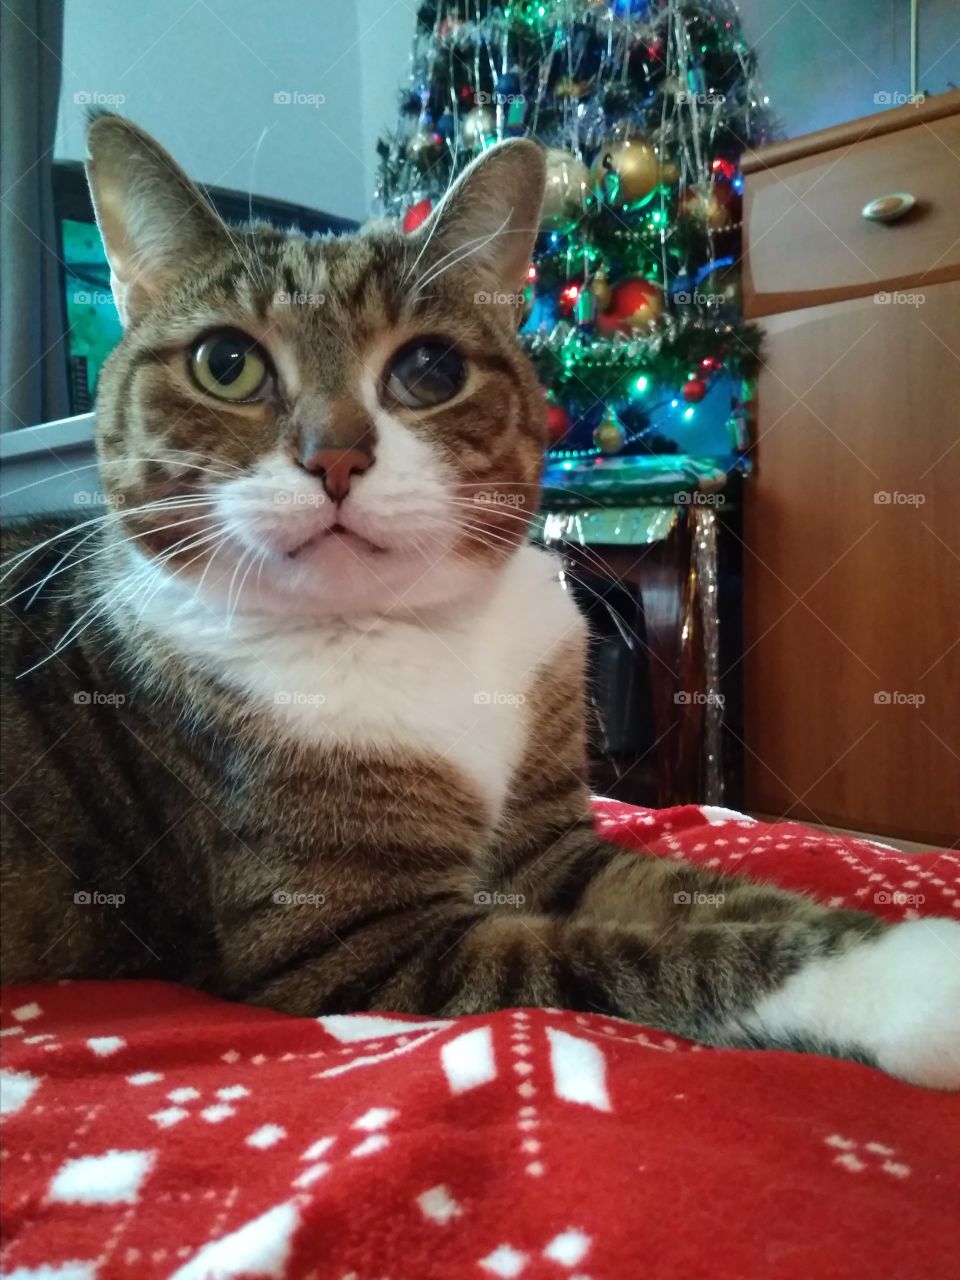 Her name is Kicia and she enjoys to lay near Christmas tree or even under it.